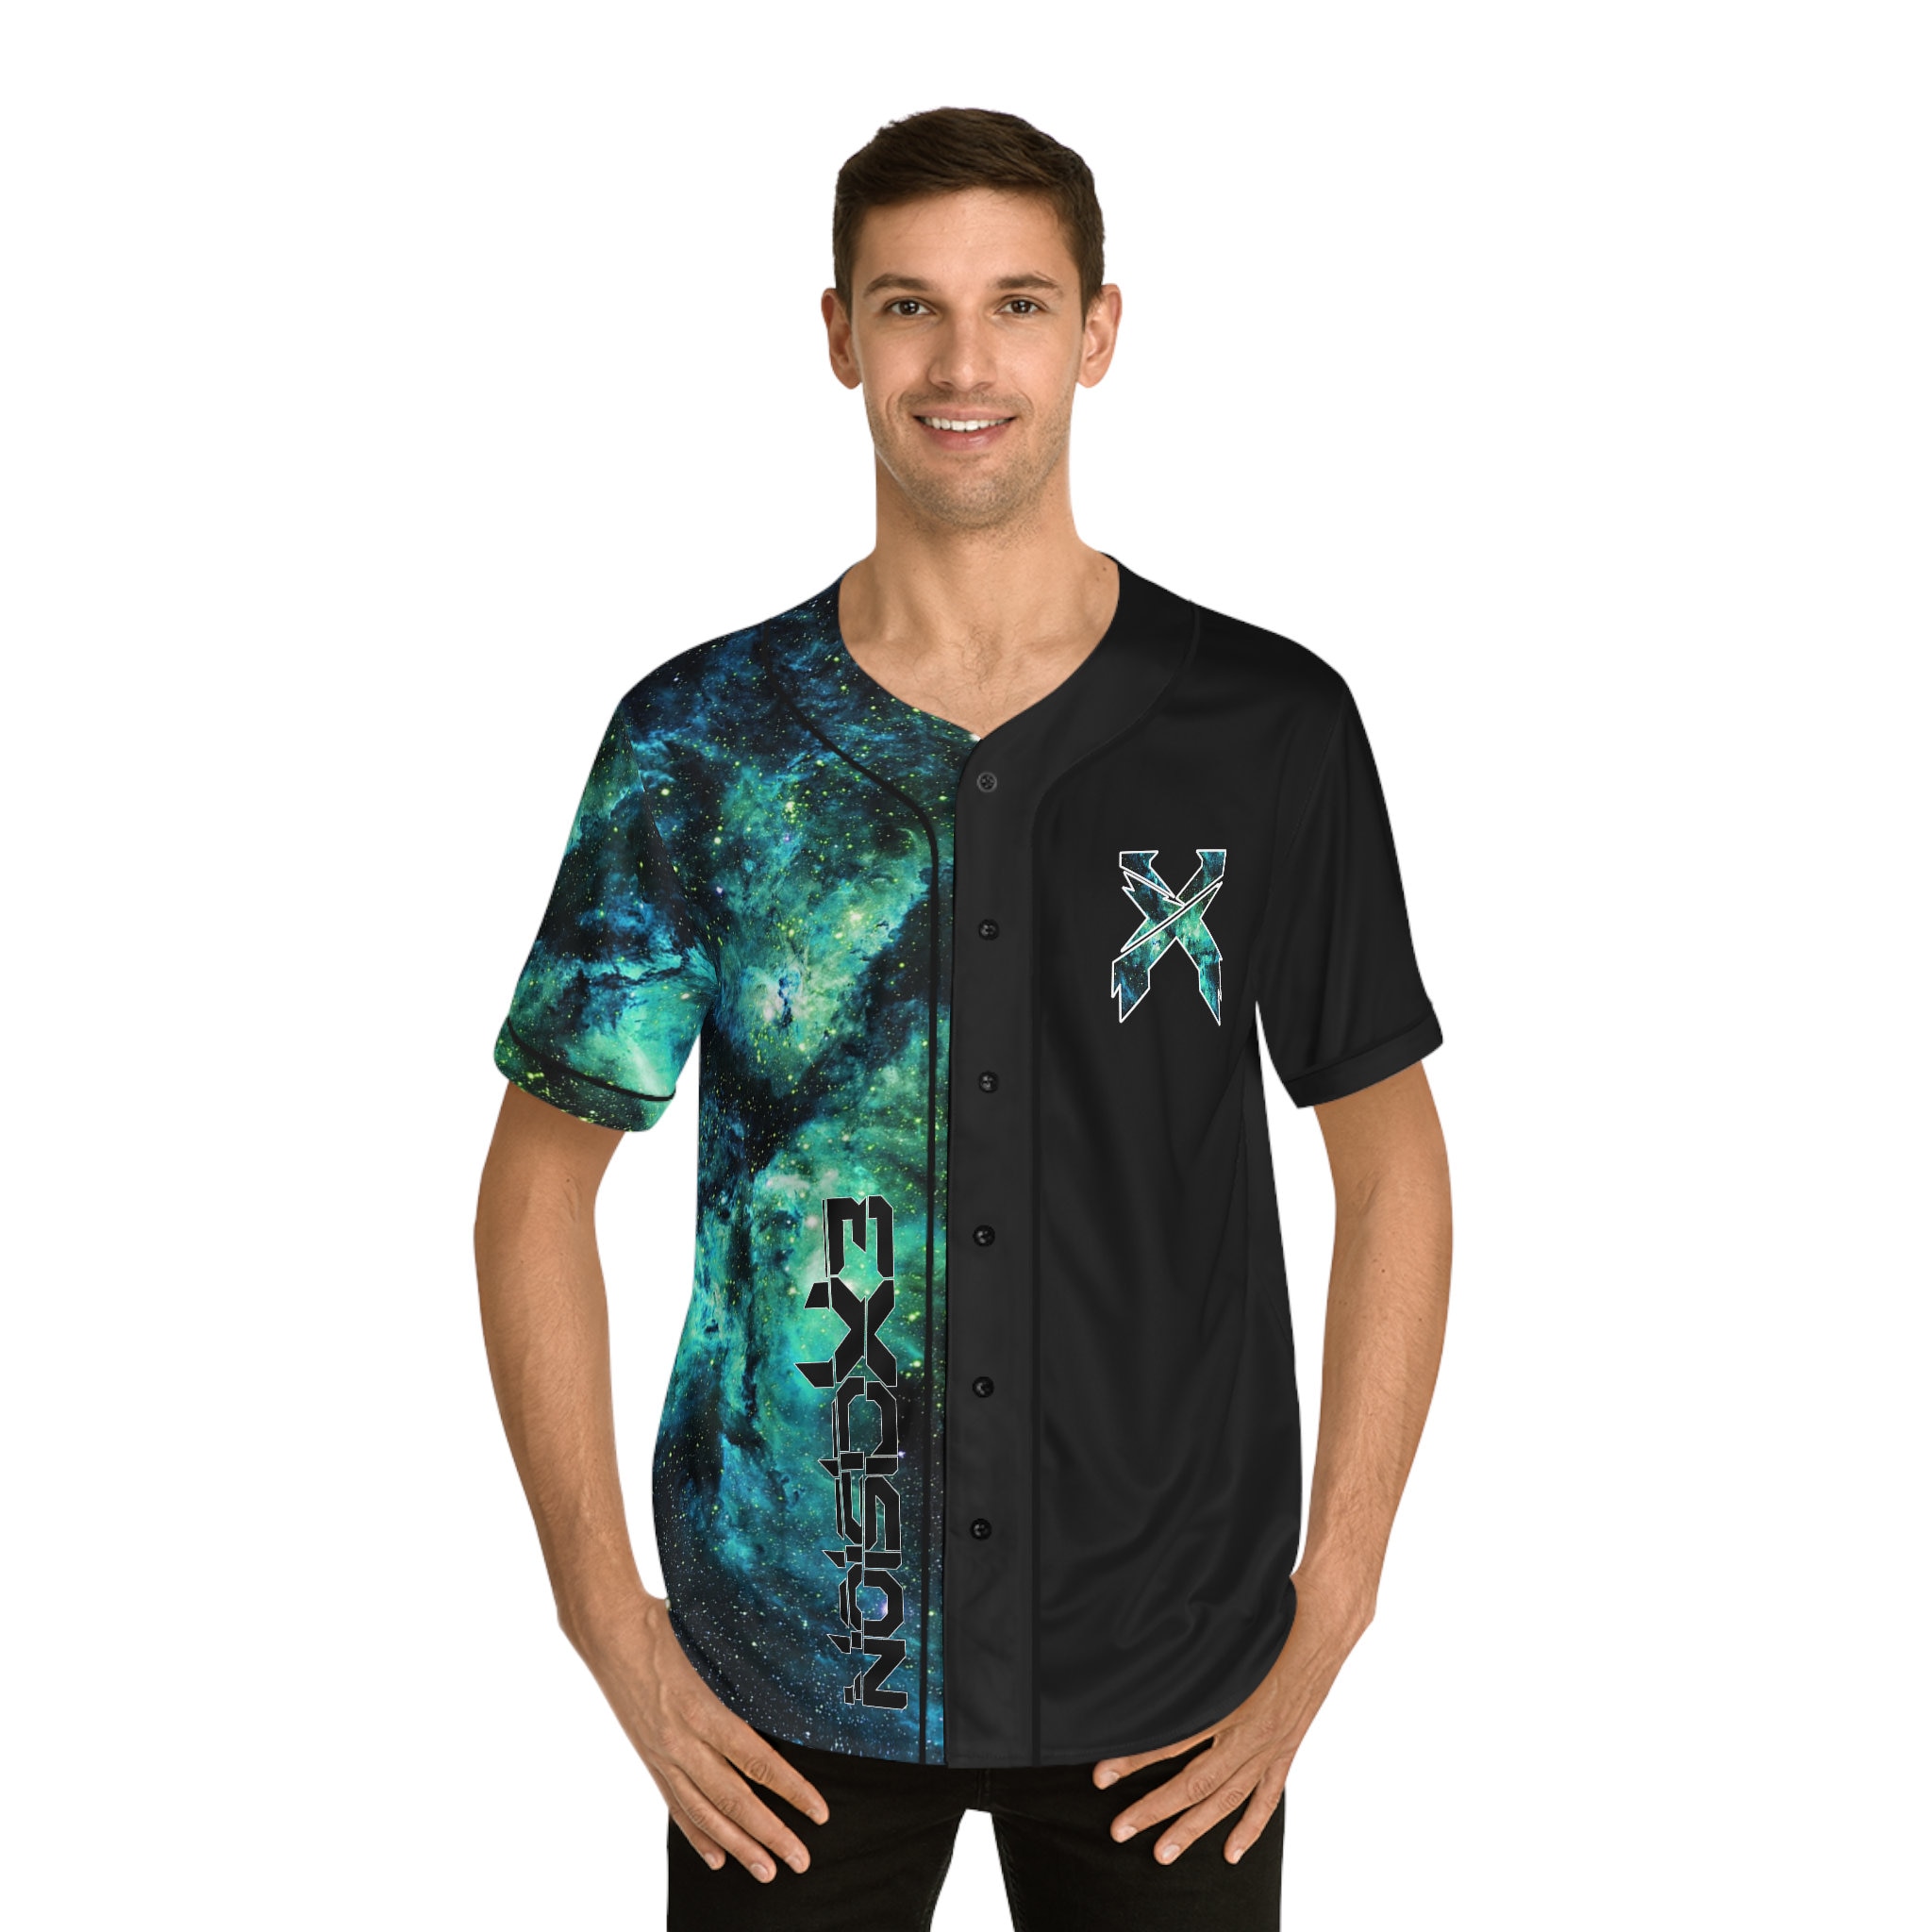 Excision Jersey blue/green Galaxy -  Canada